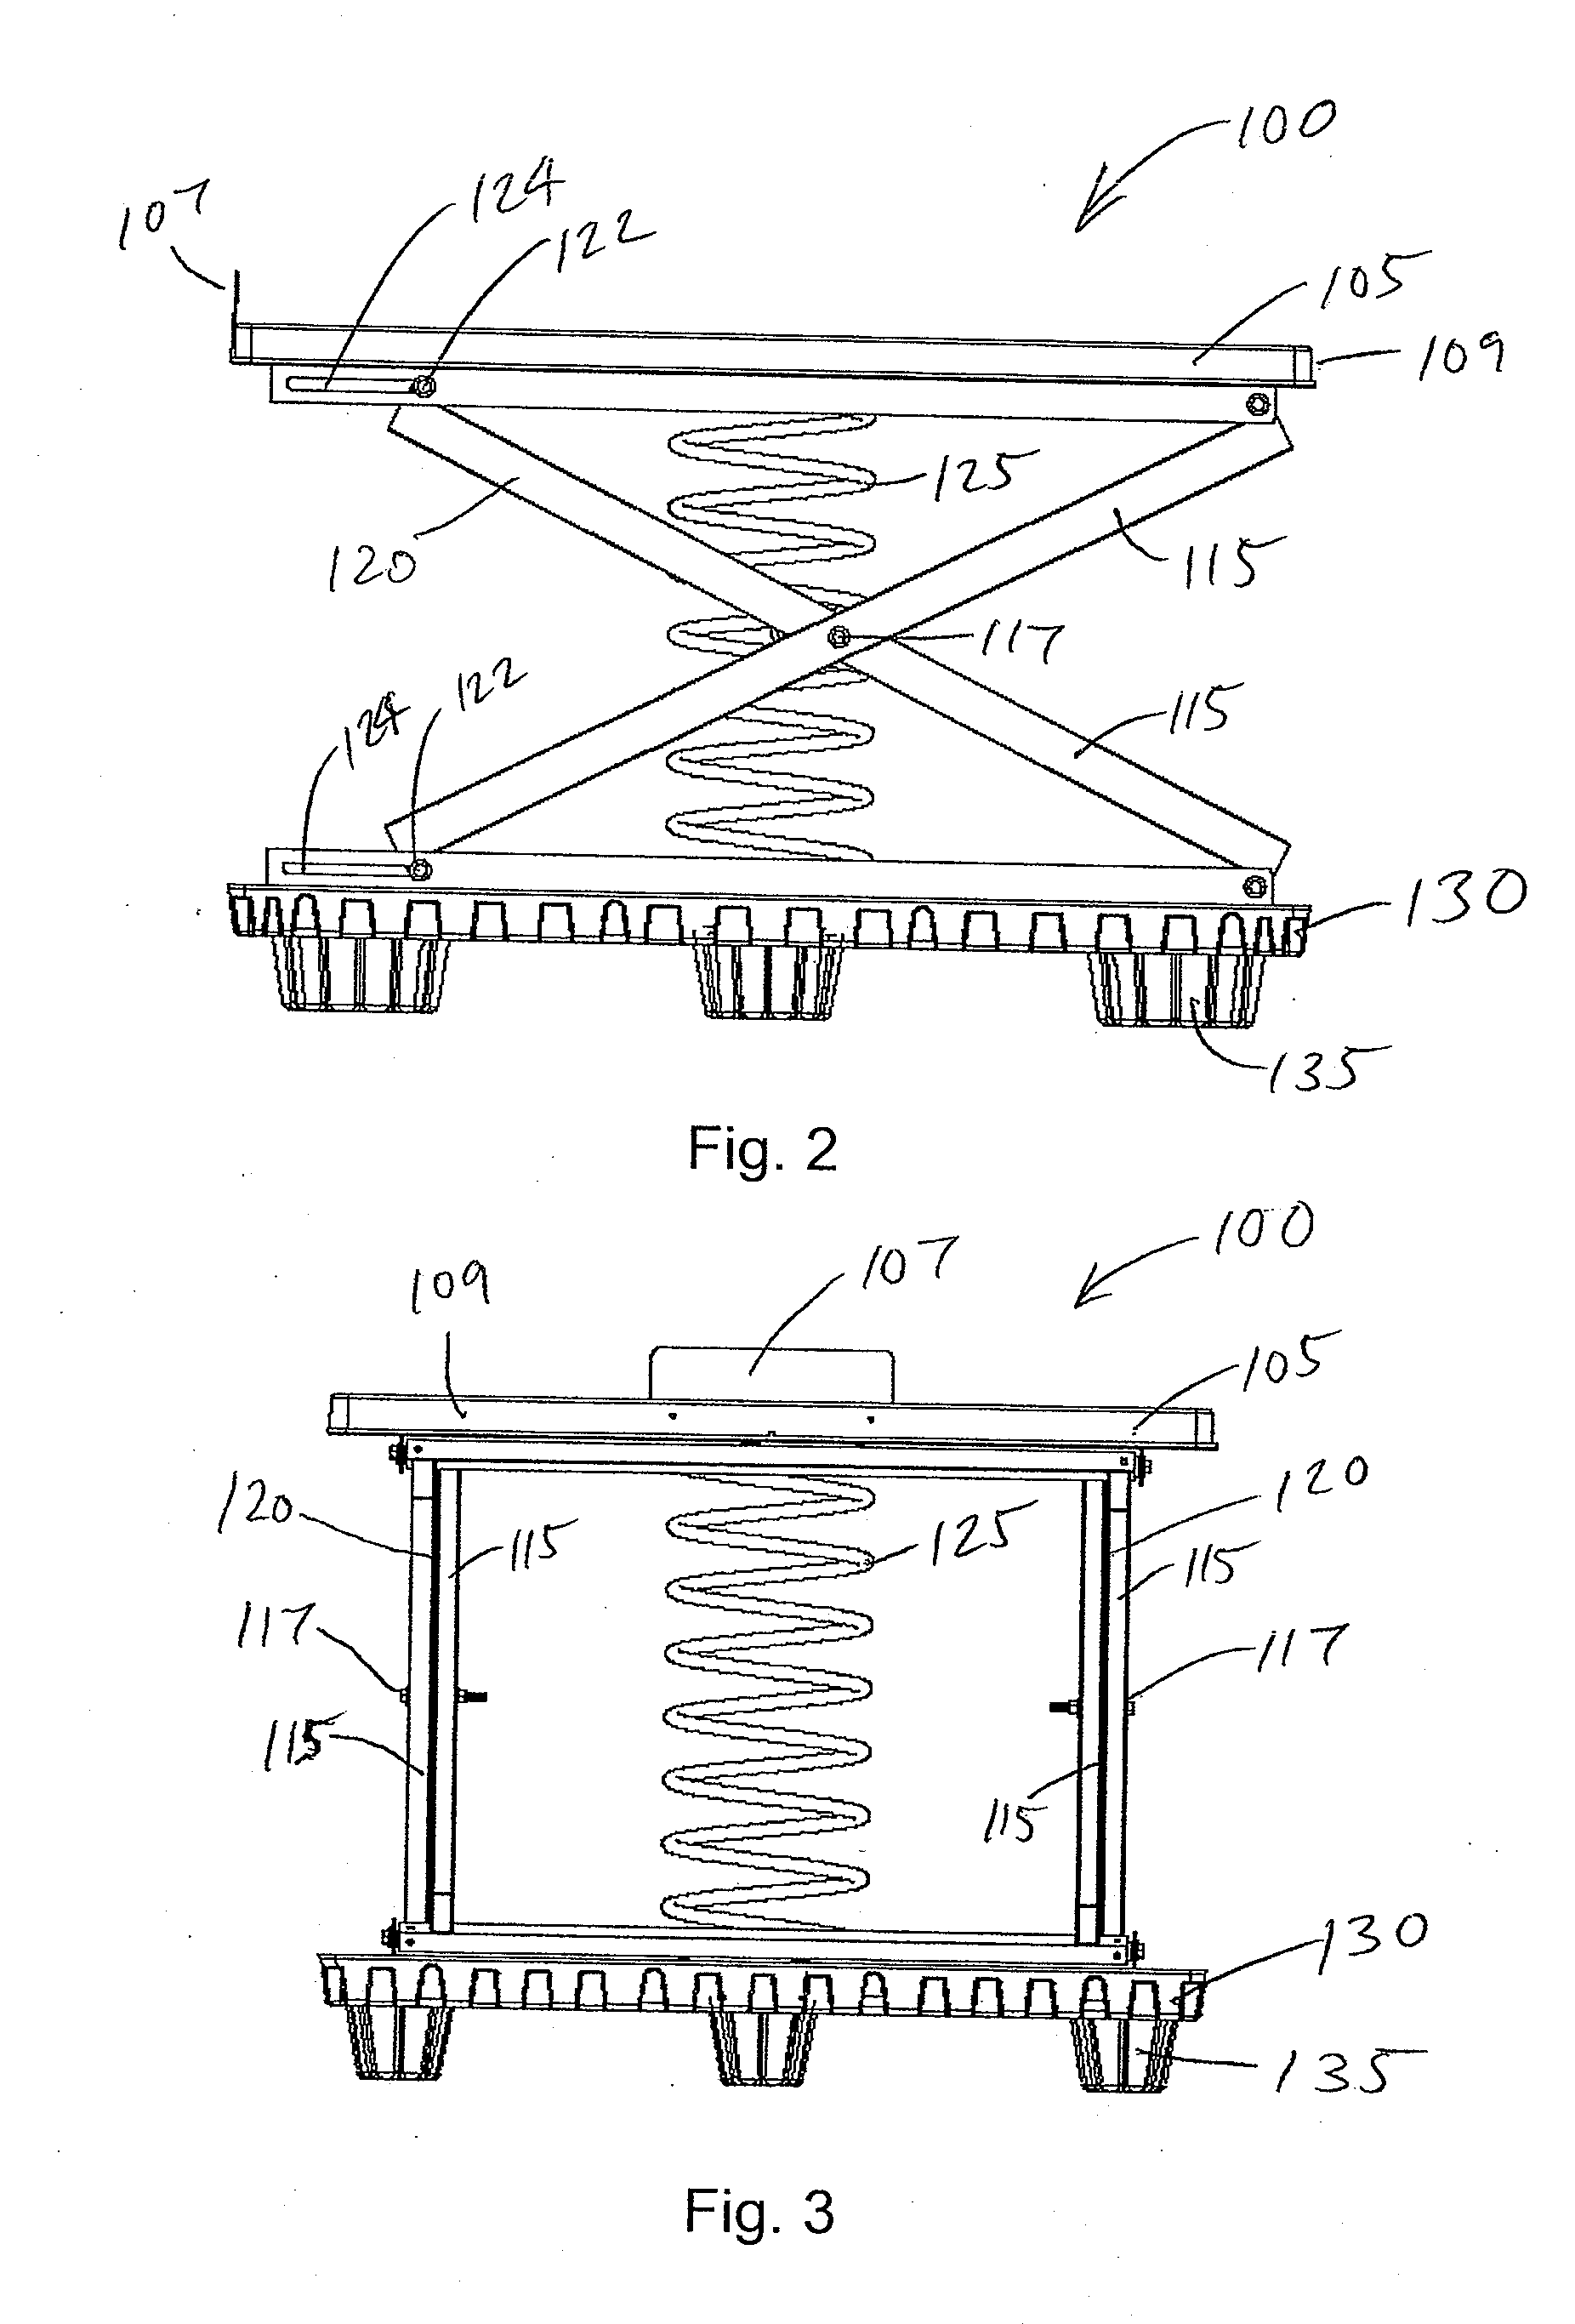 Product-Lifting Display and Merchandising System